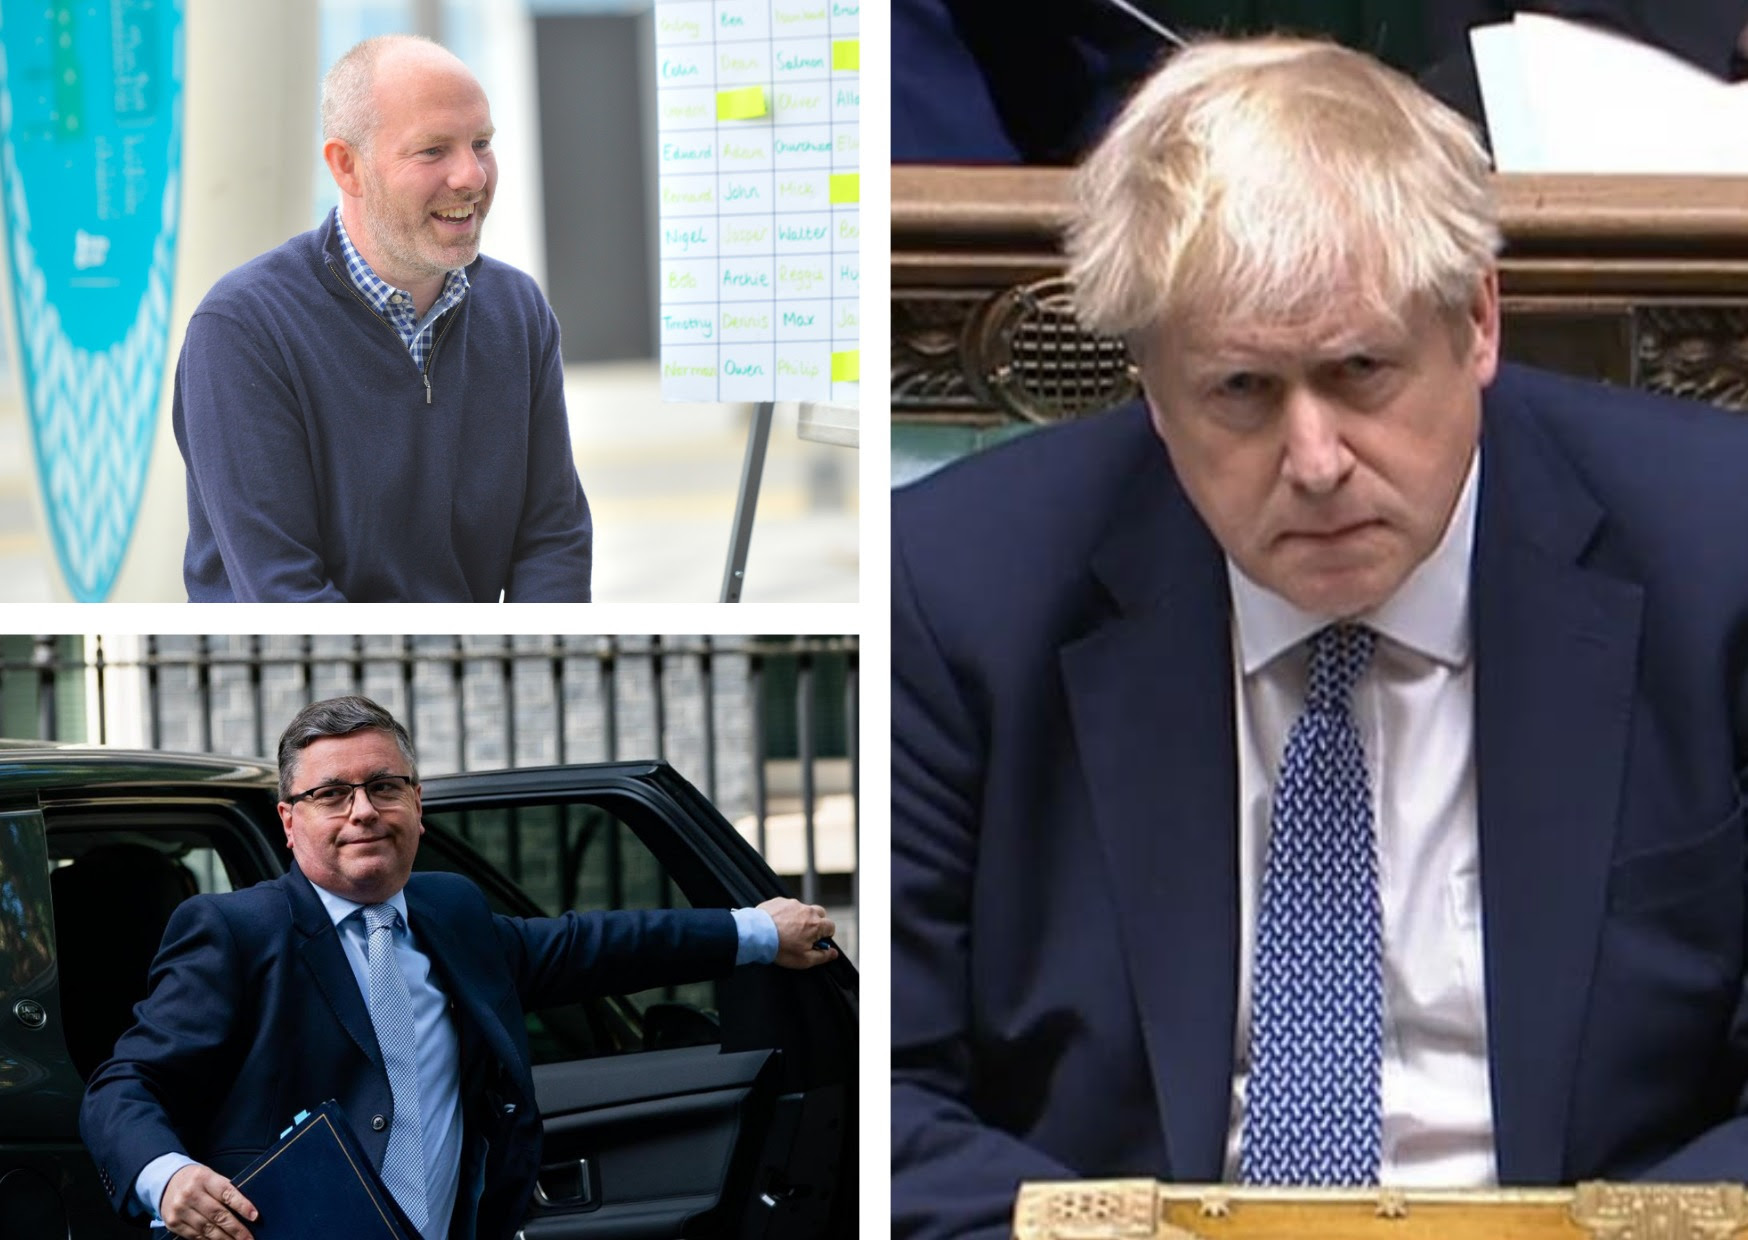 Swindon MPs react as calls for PM's resignation grow and more Downing Street parties revealed